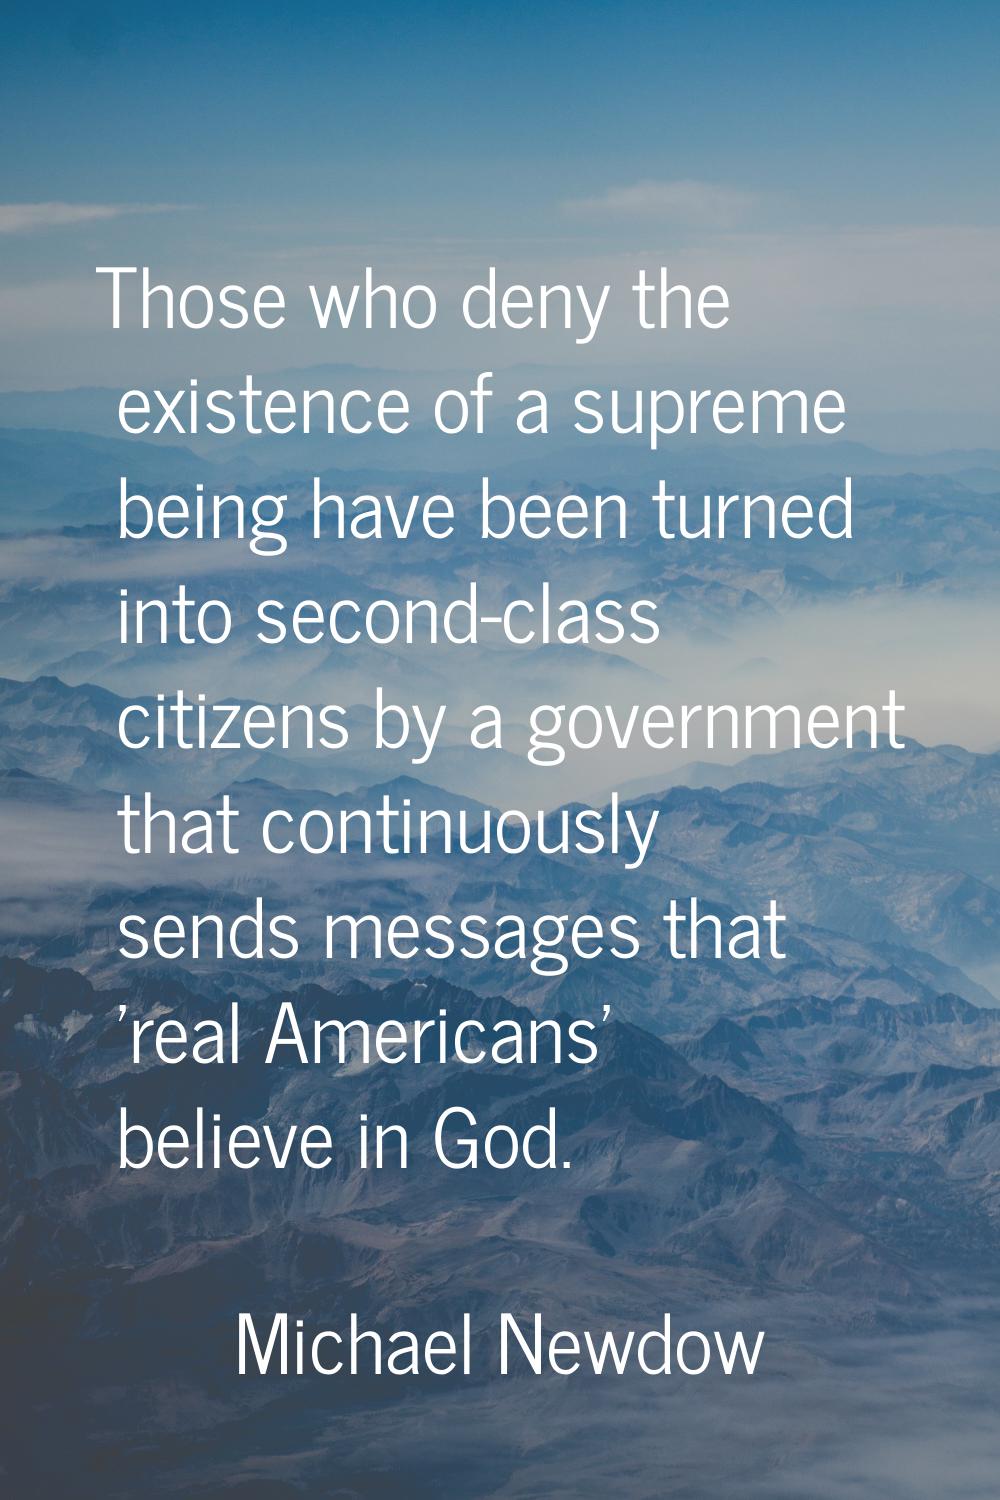 Those who deny the existence of a supreme being have been turned into second-class citizens by a go